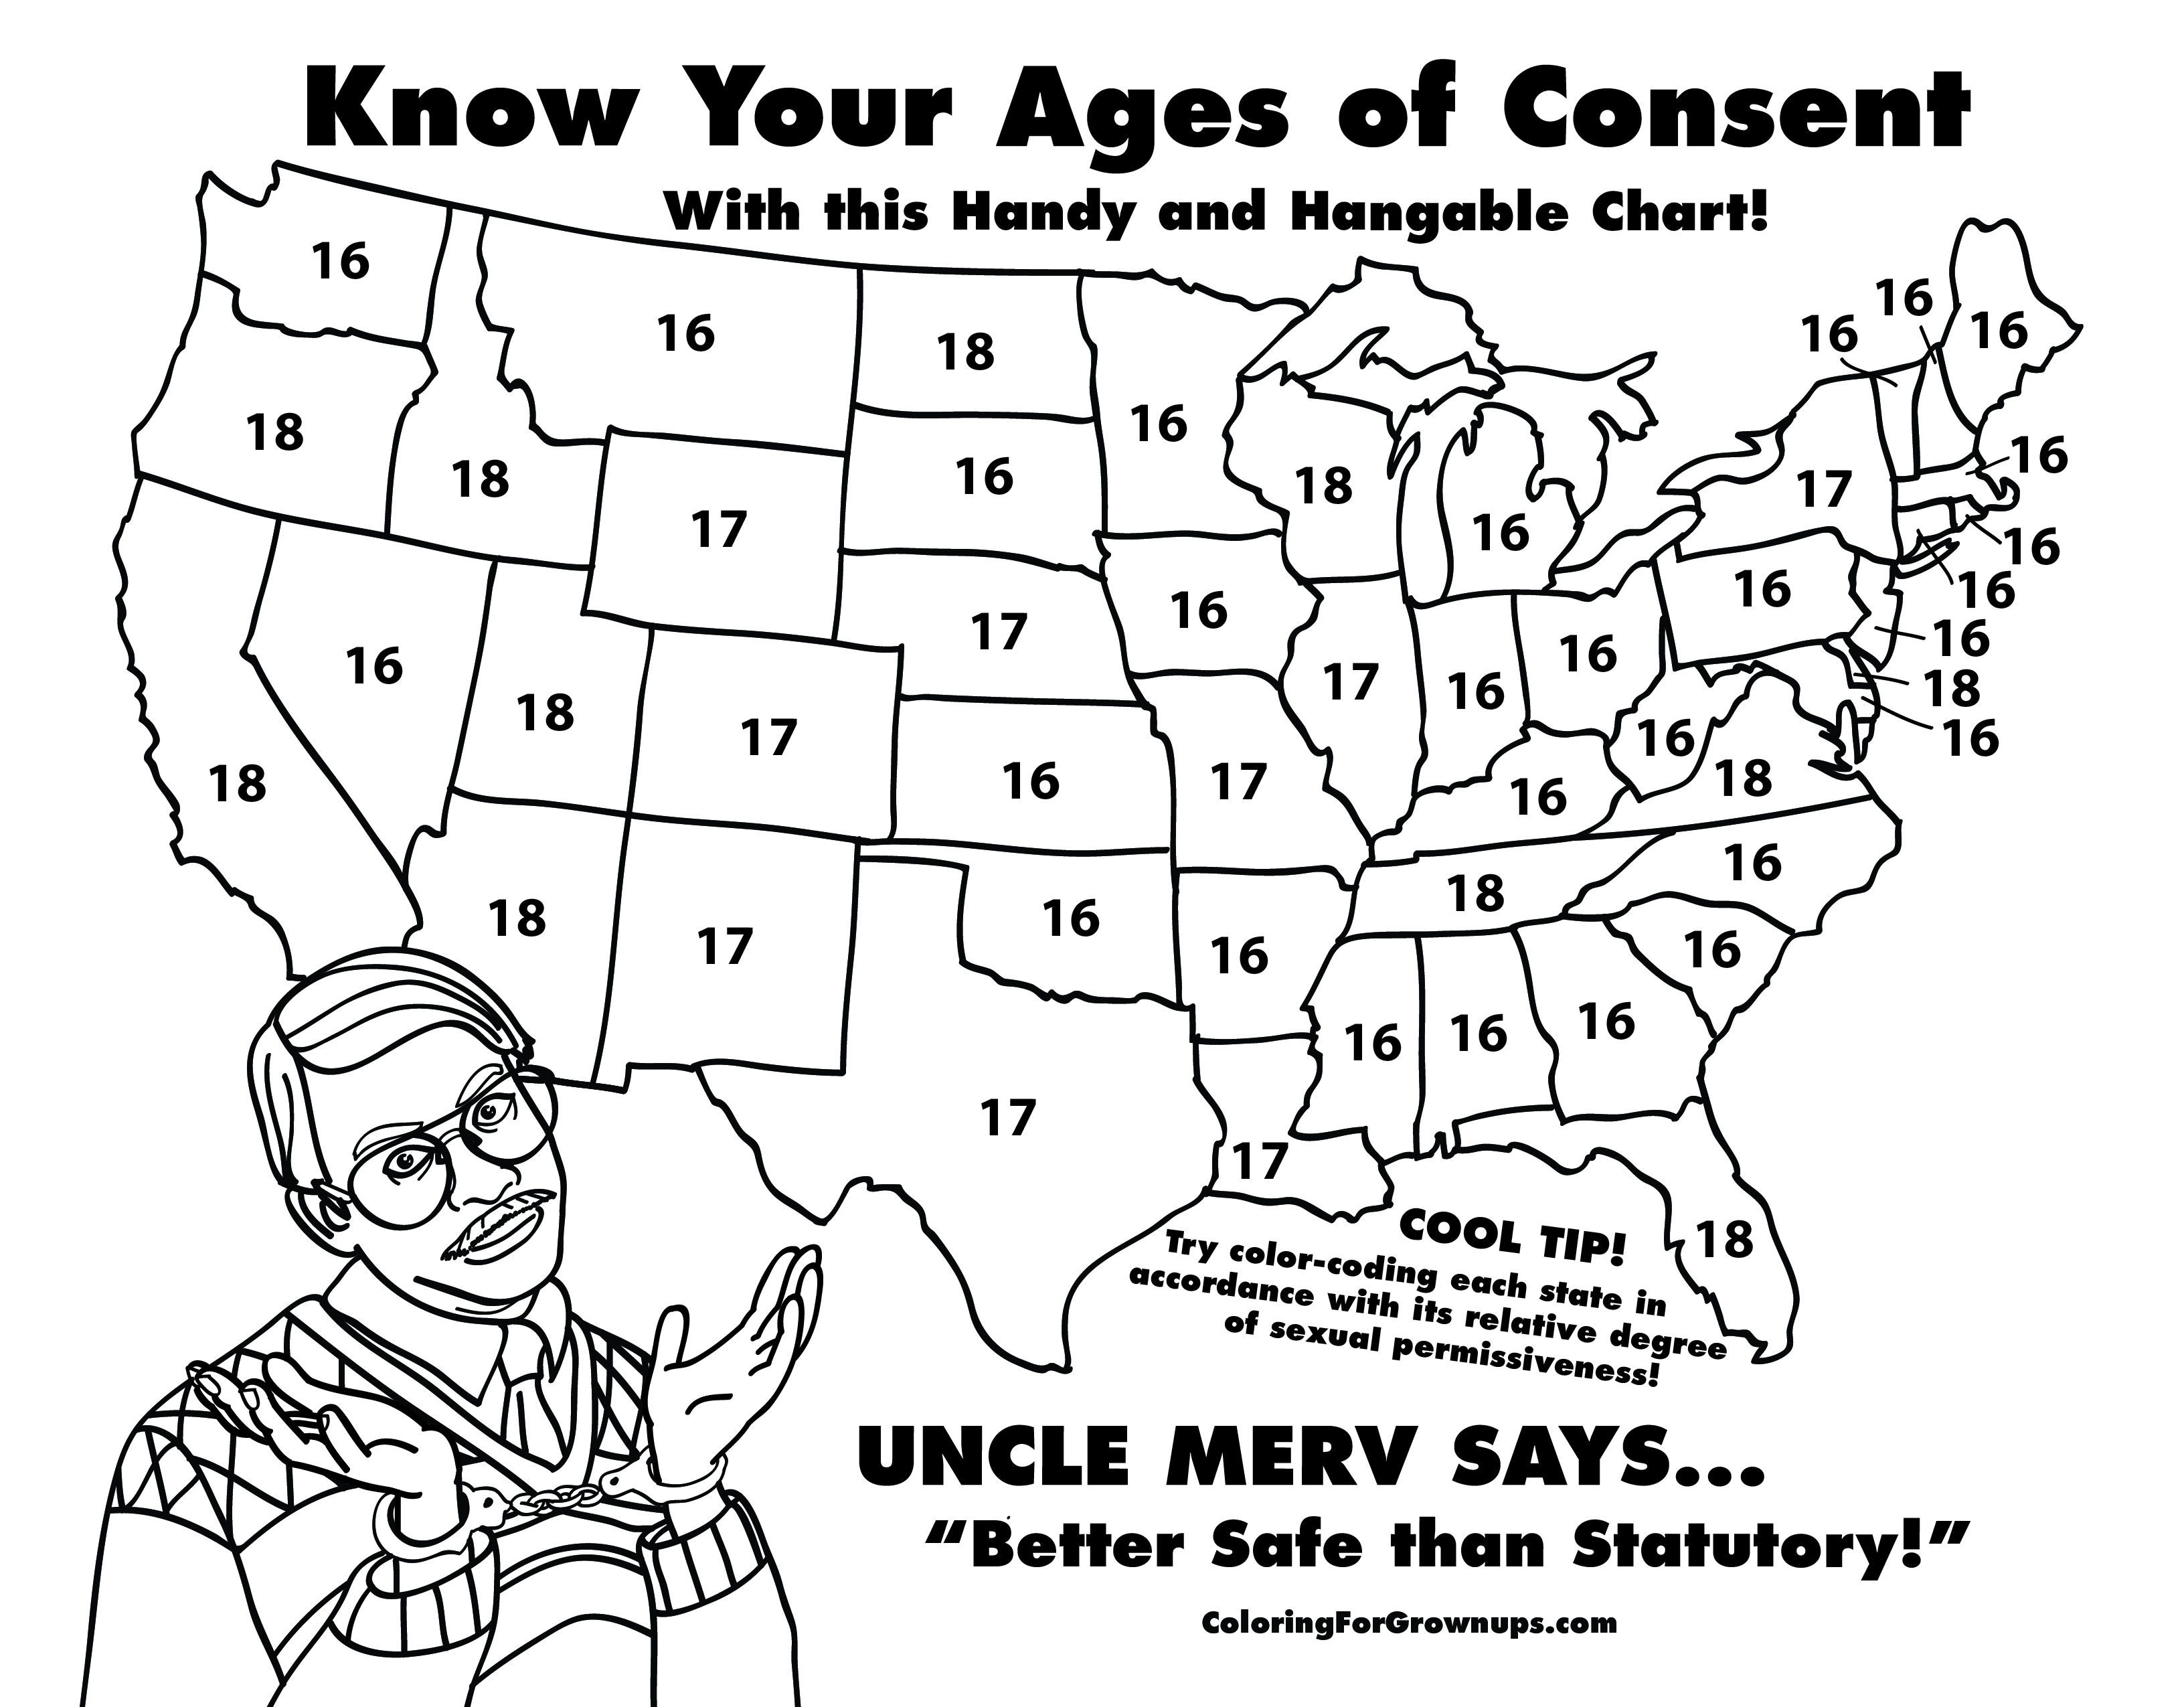 [Image: know-your-ages-of-consent.jpg]